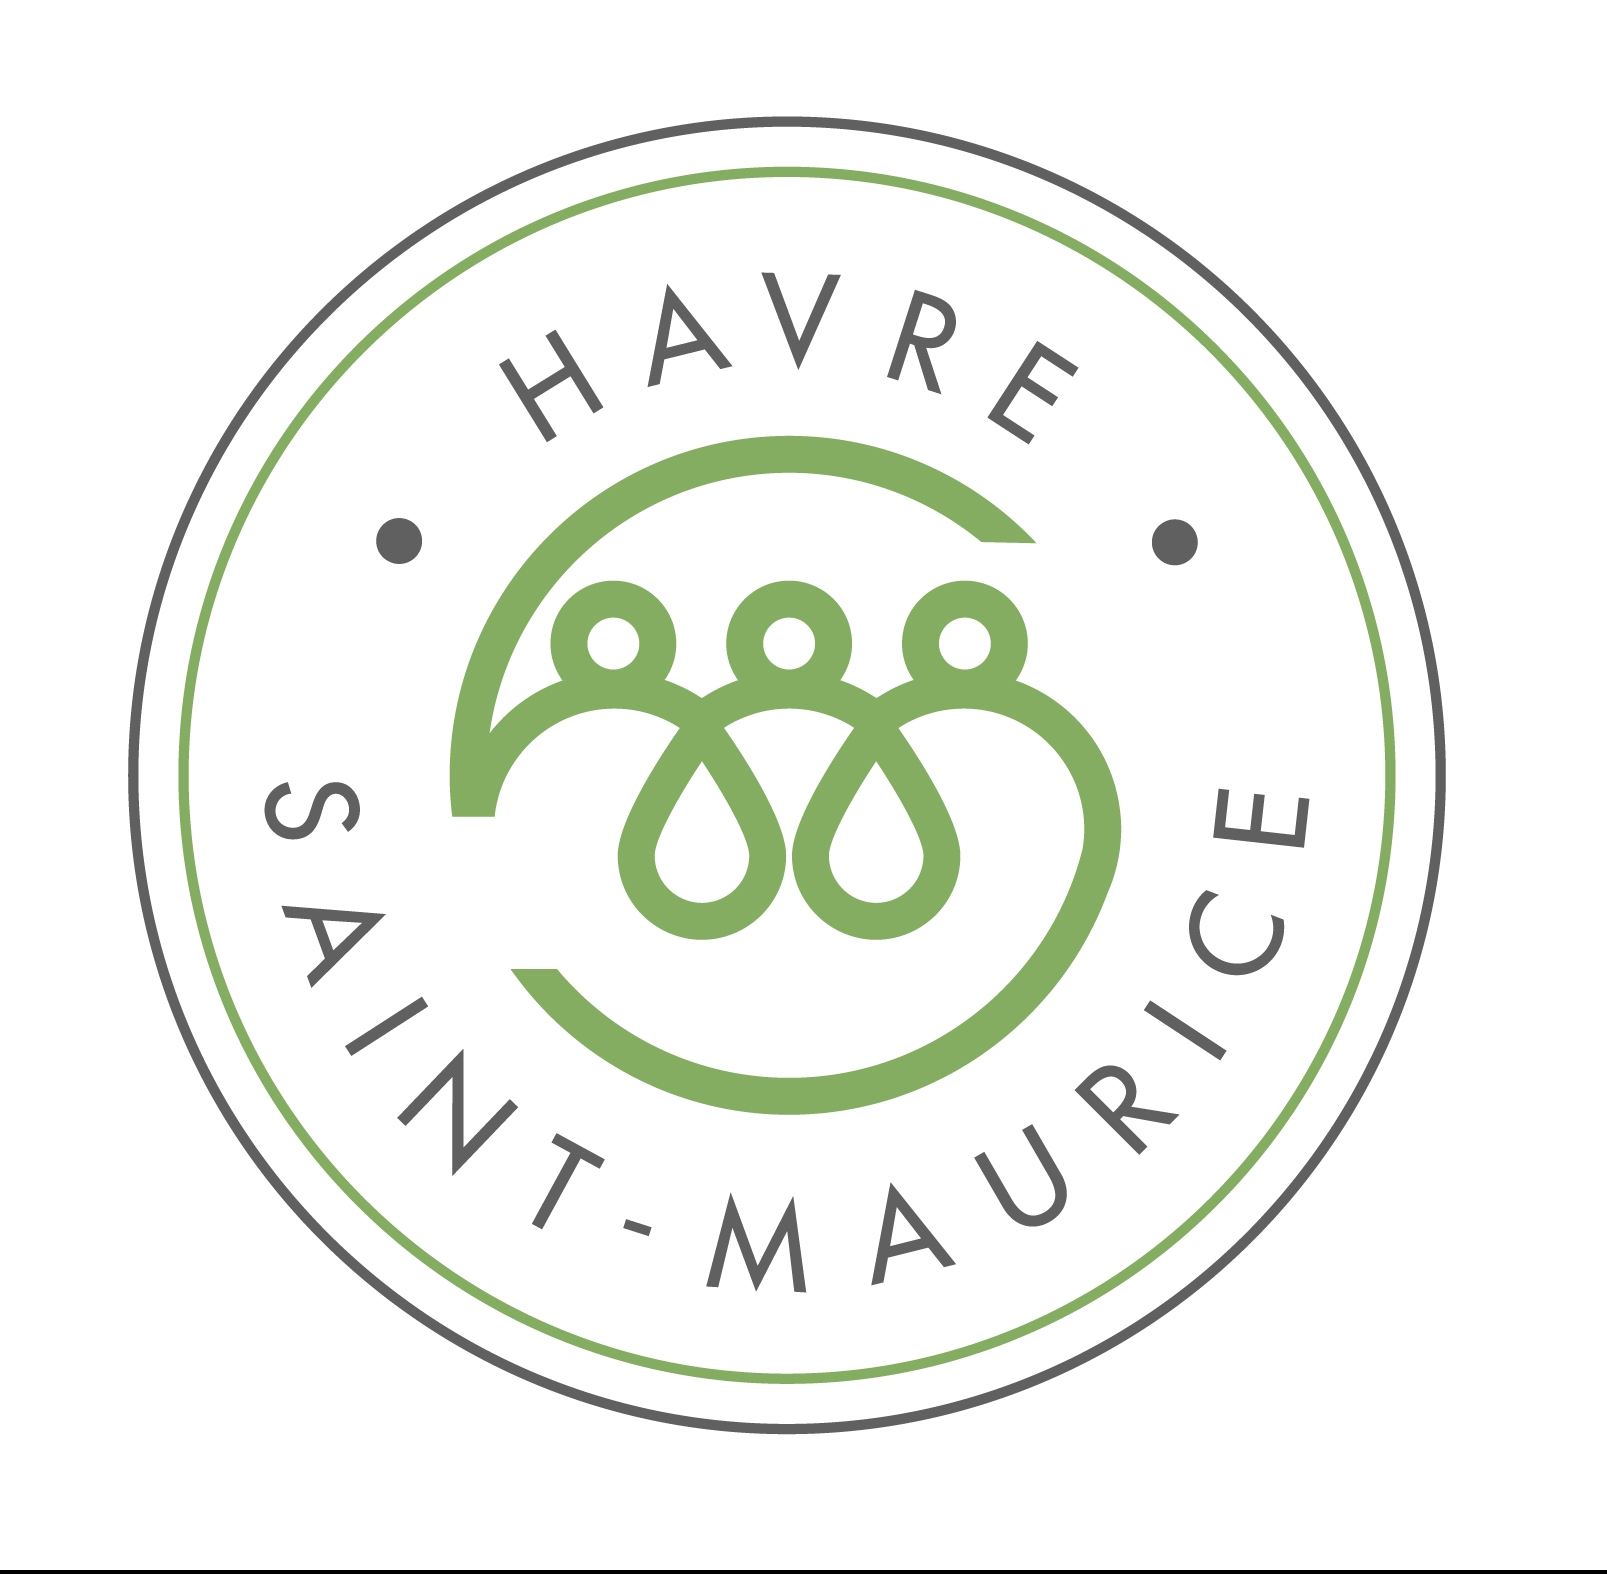 Le Havre St-Maurice